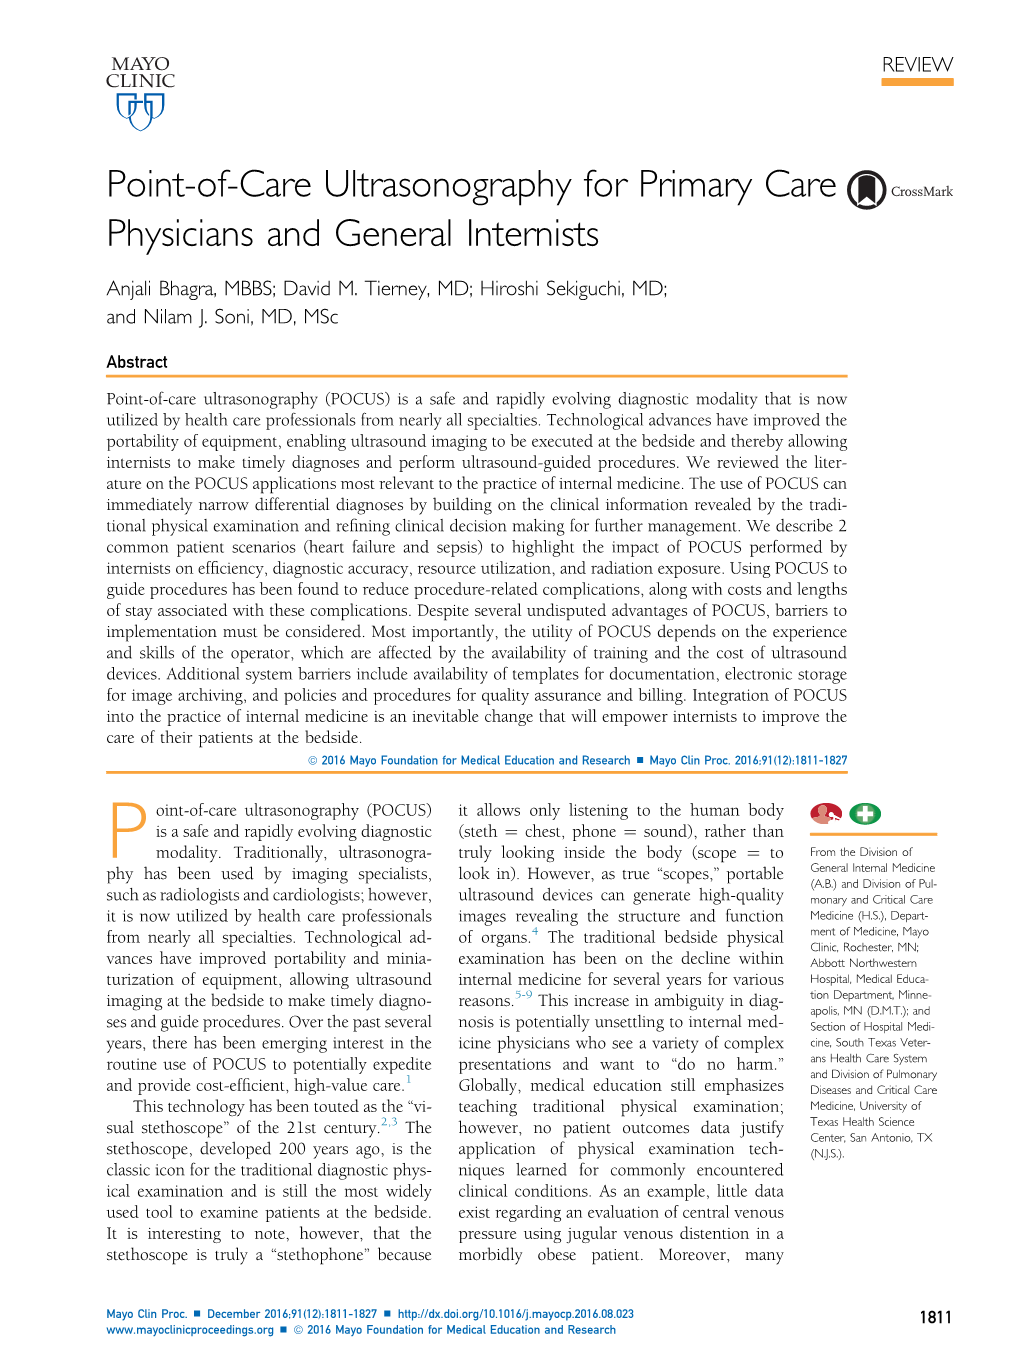 Point-Of-Care Ultrasonography for Primary Care Physicians and General Internists